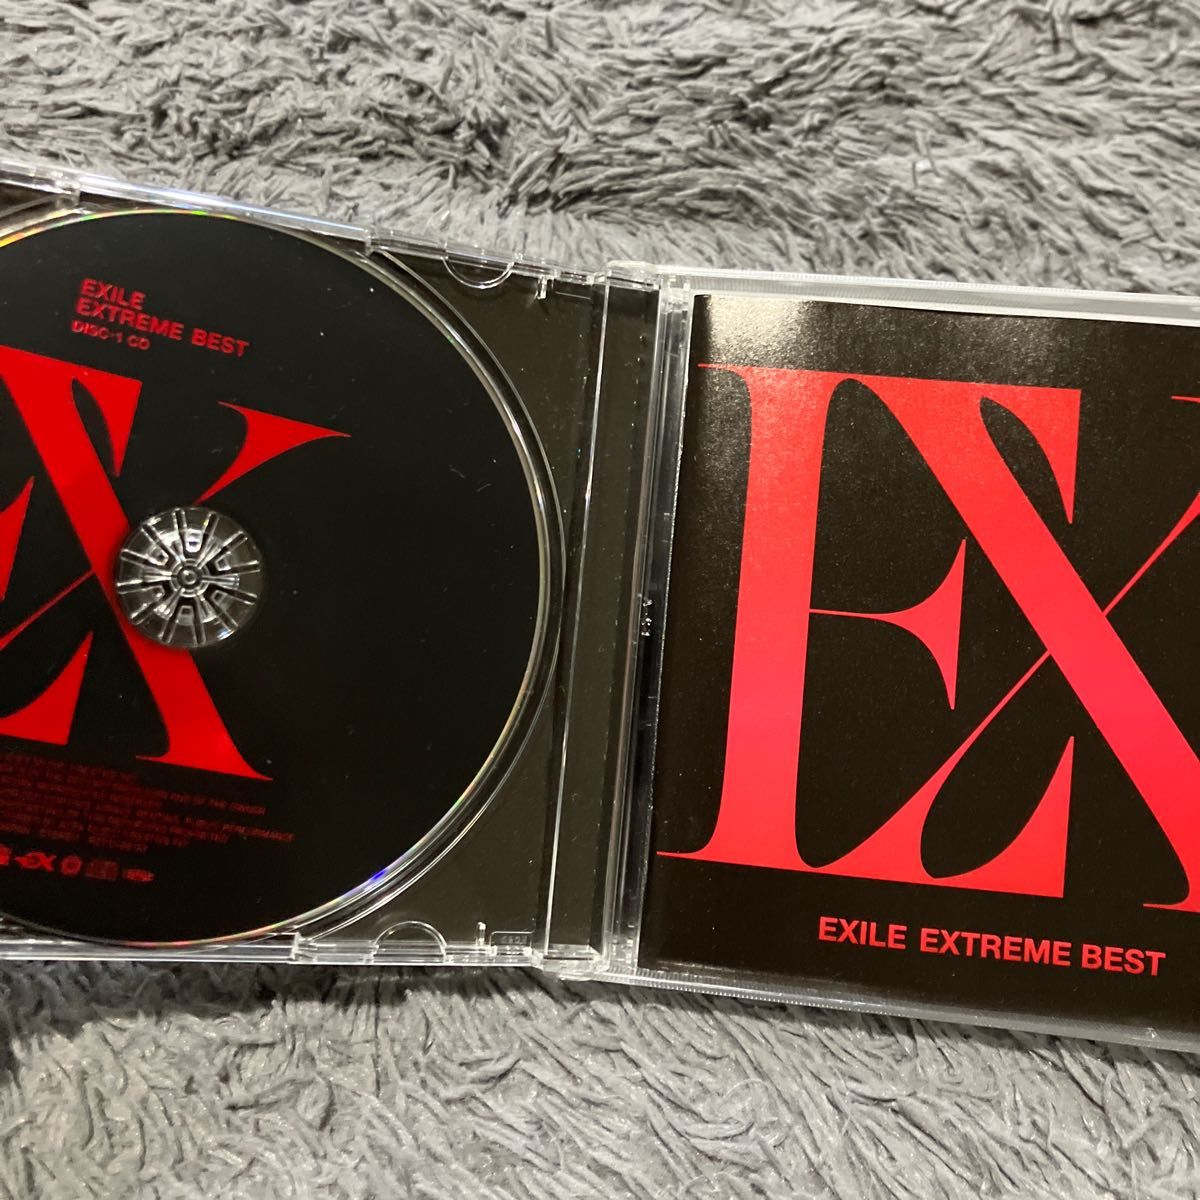 EXTREME BEST EXILE ベスト